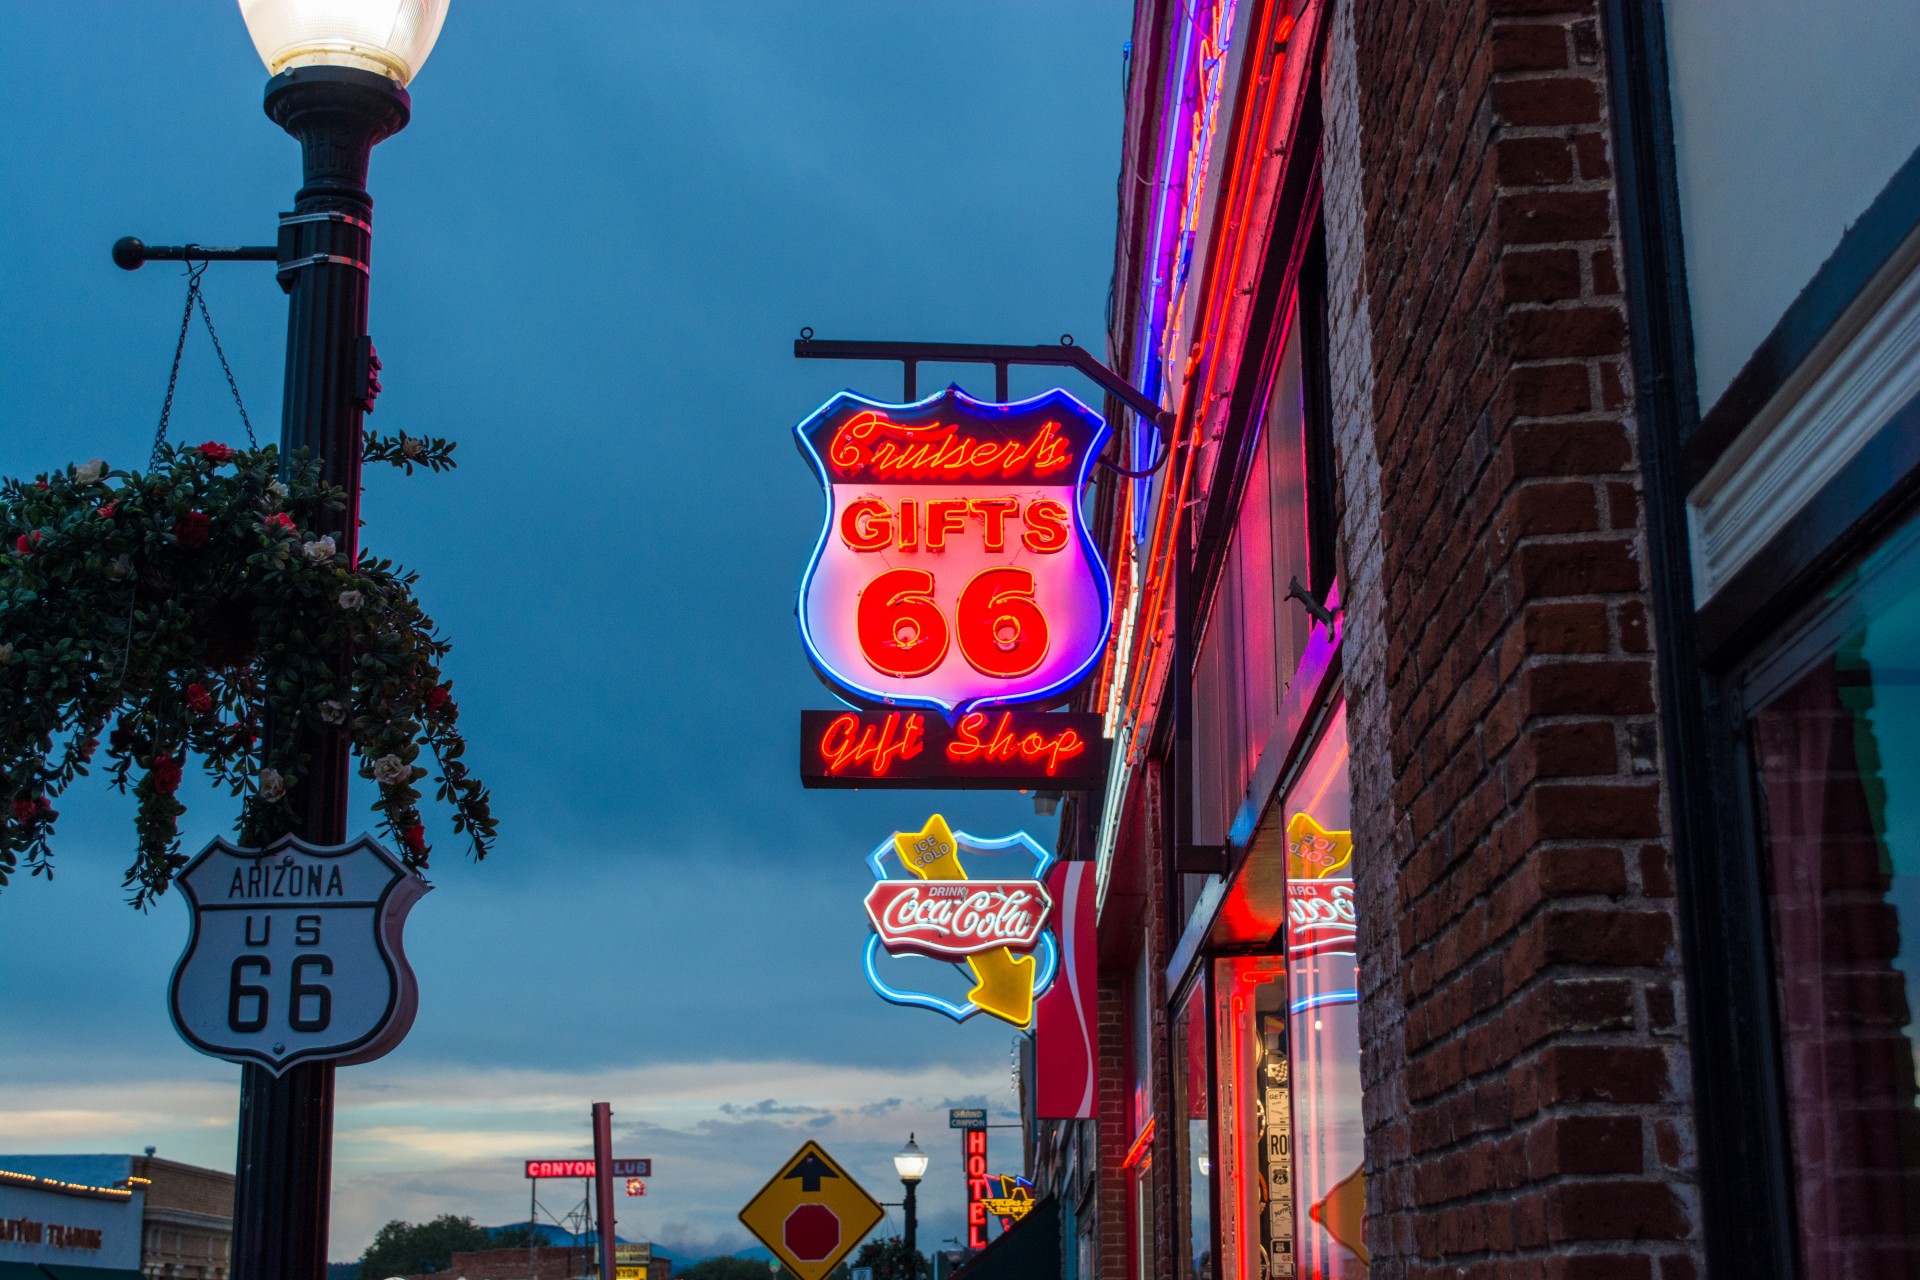 Route66